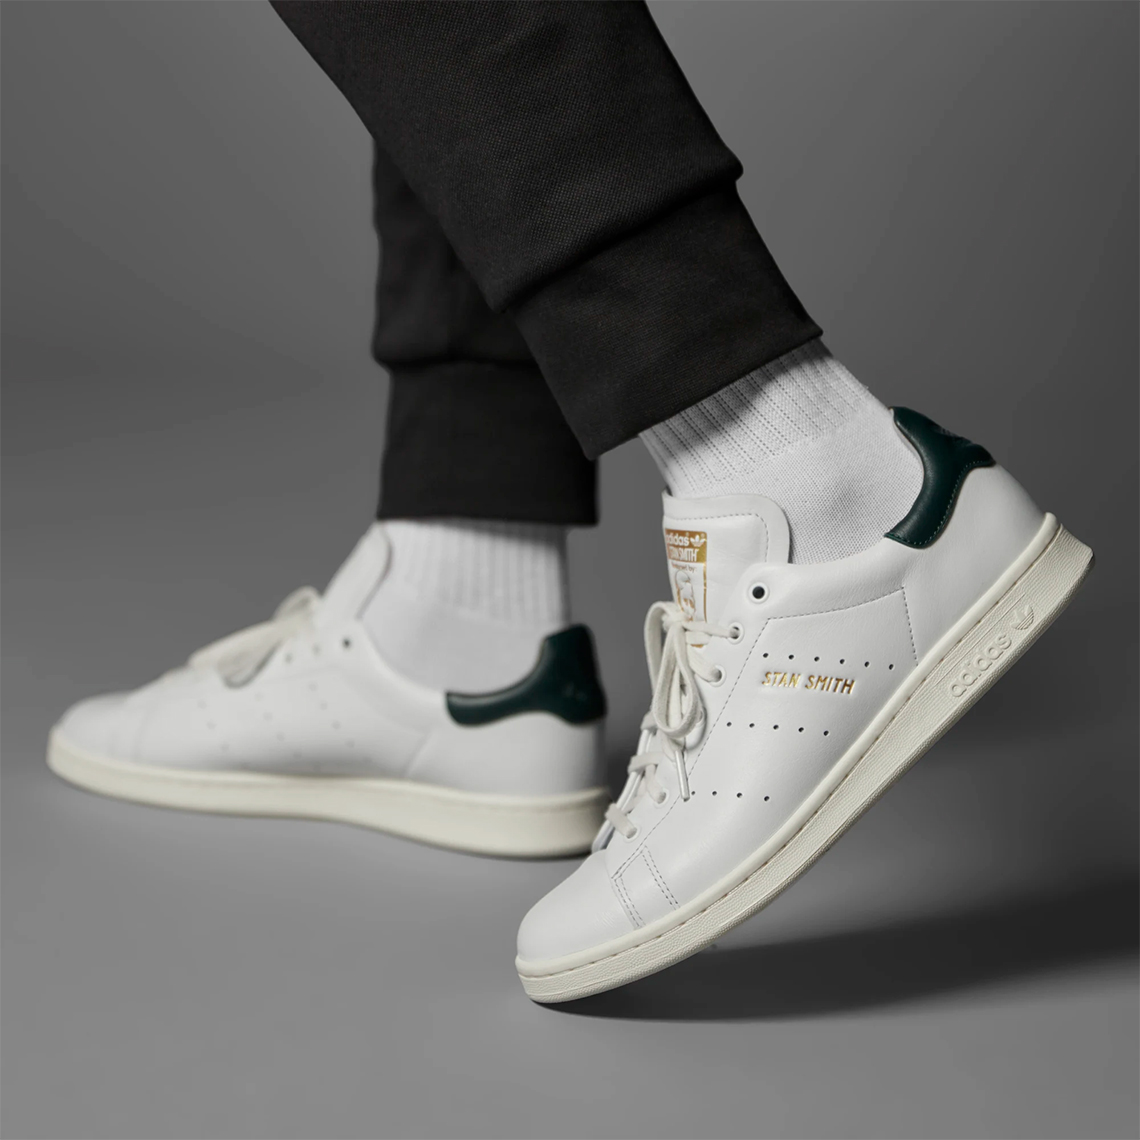 Pretty Fraud to punish adidas Presents The Stan Smith Lux With Buttery Leathers - SneakerNews.com